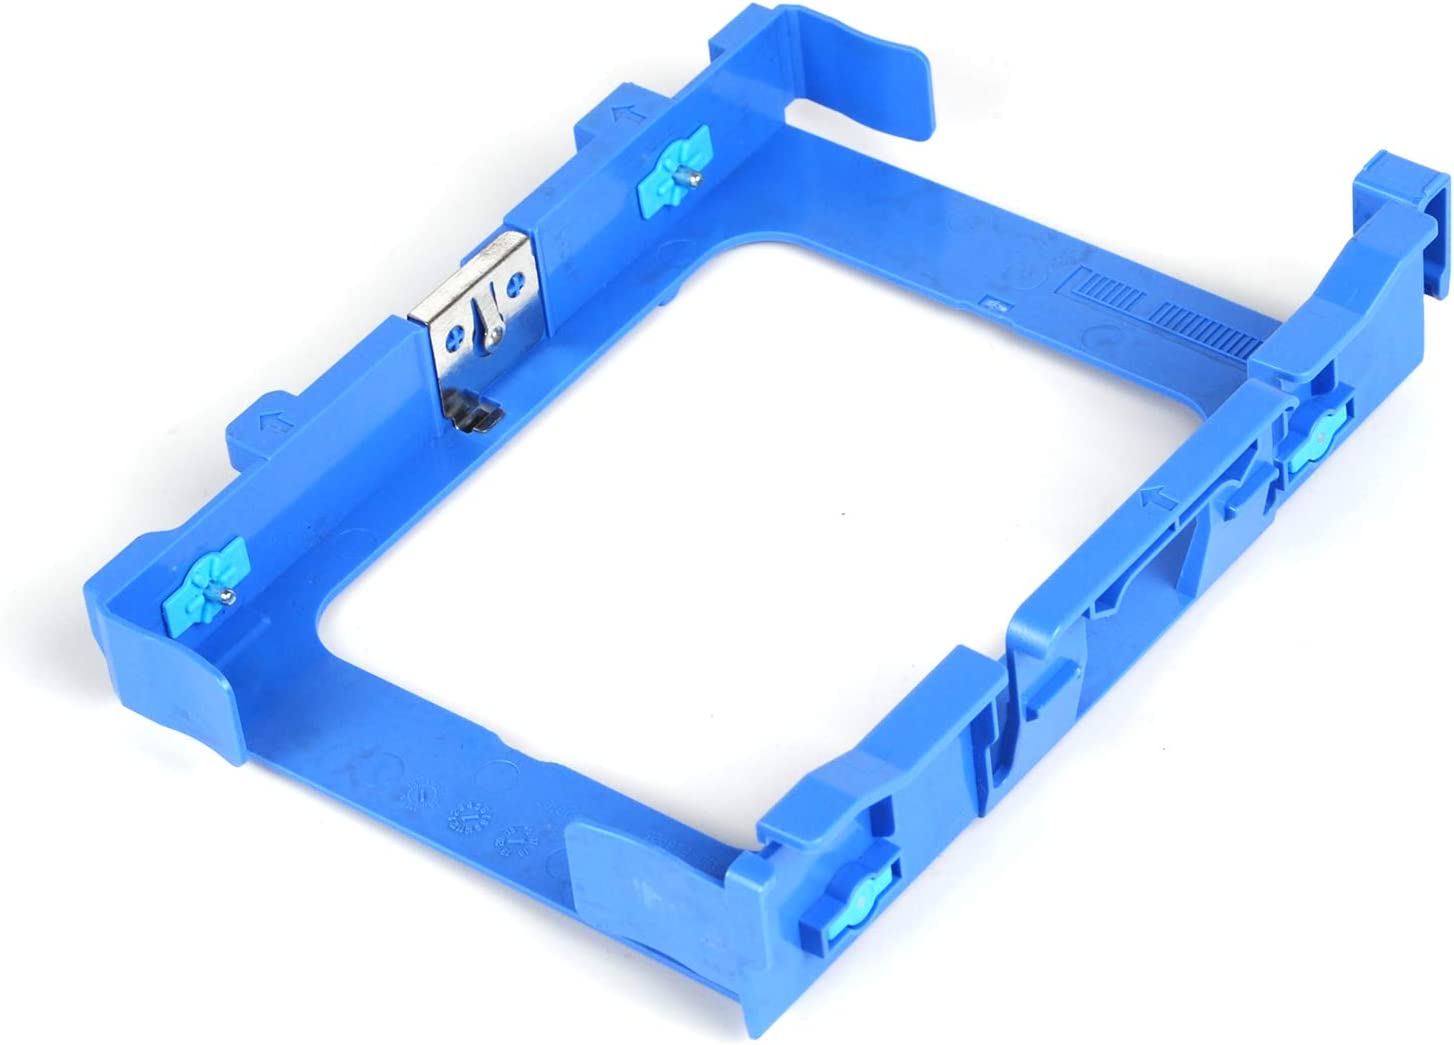 T3420 H8V8K 3.5" HDD Caddy Tray for Dell OPX 3040 3050 3420 5040 5050 7040 7050 SFF